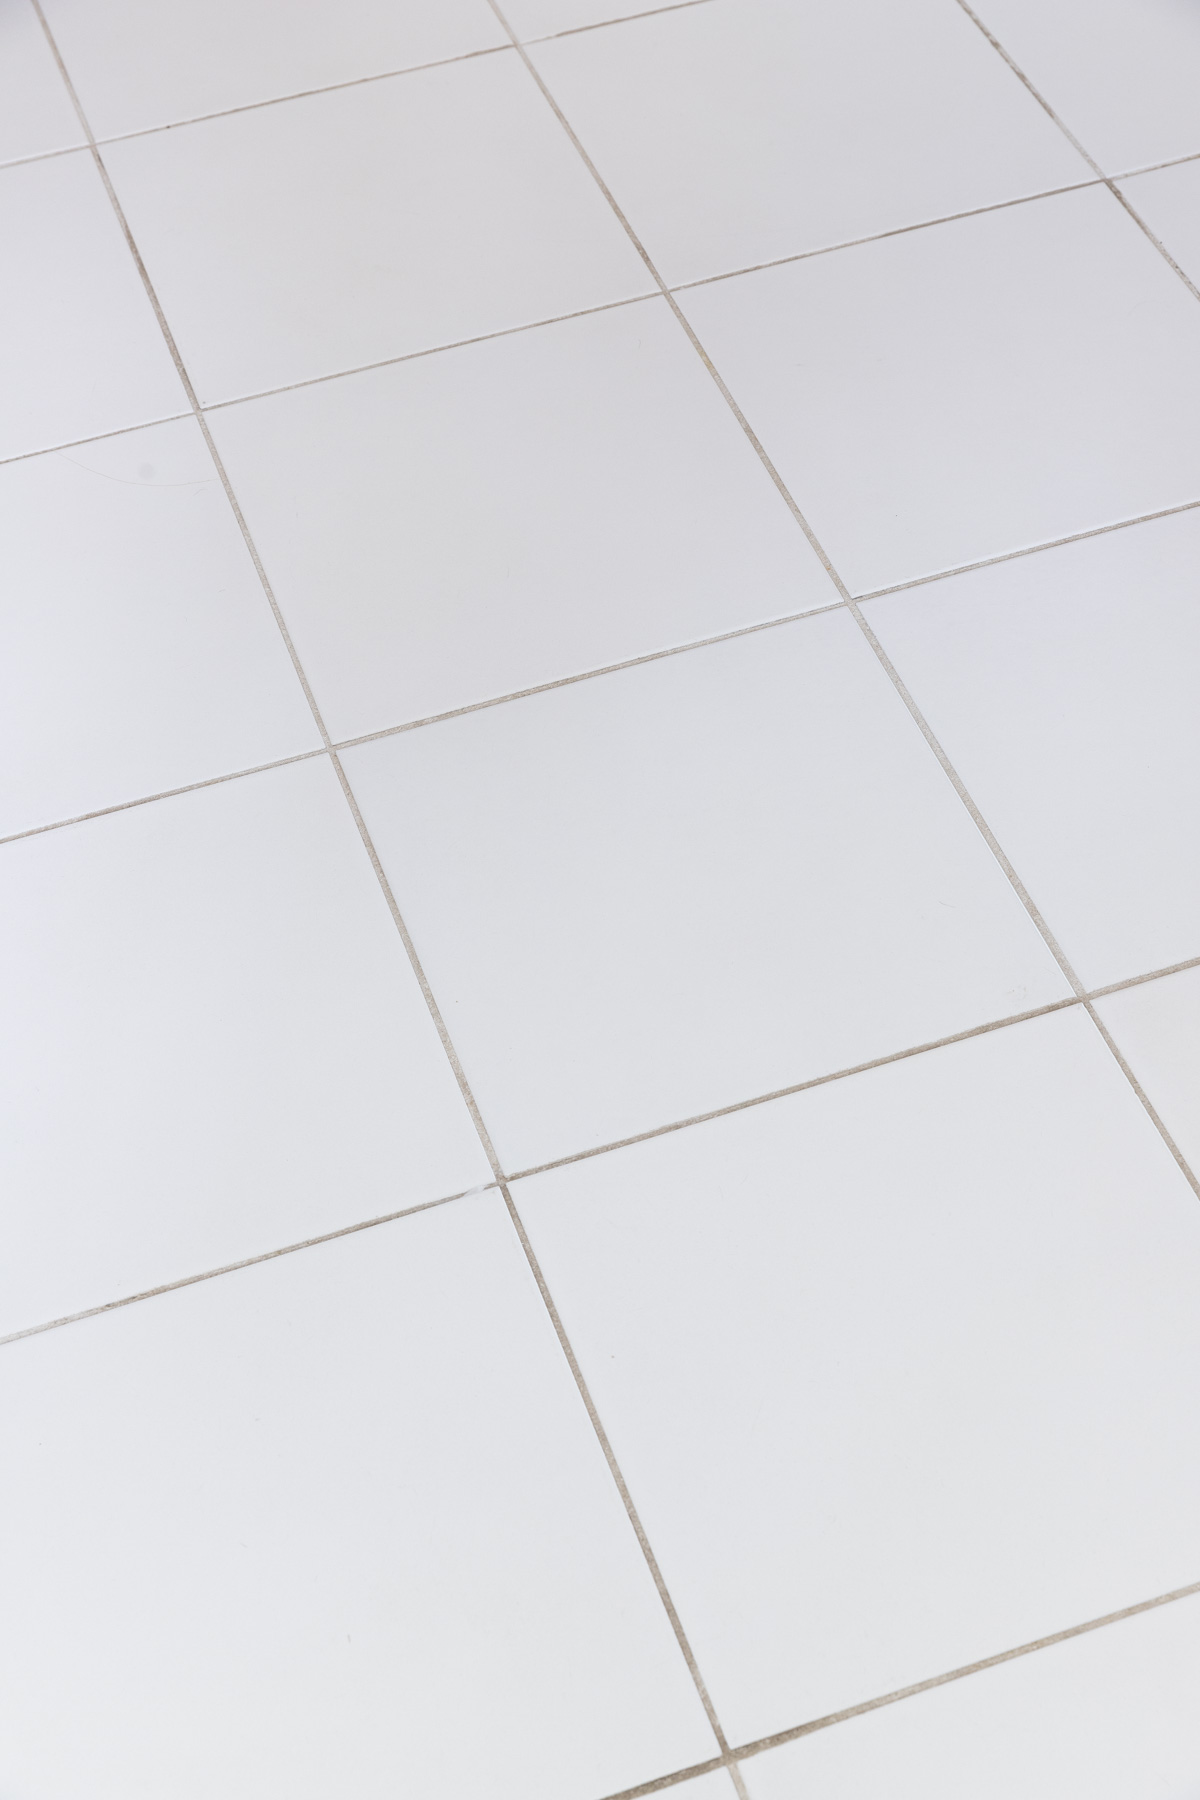 Tile floor with dirty grout